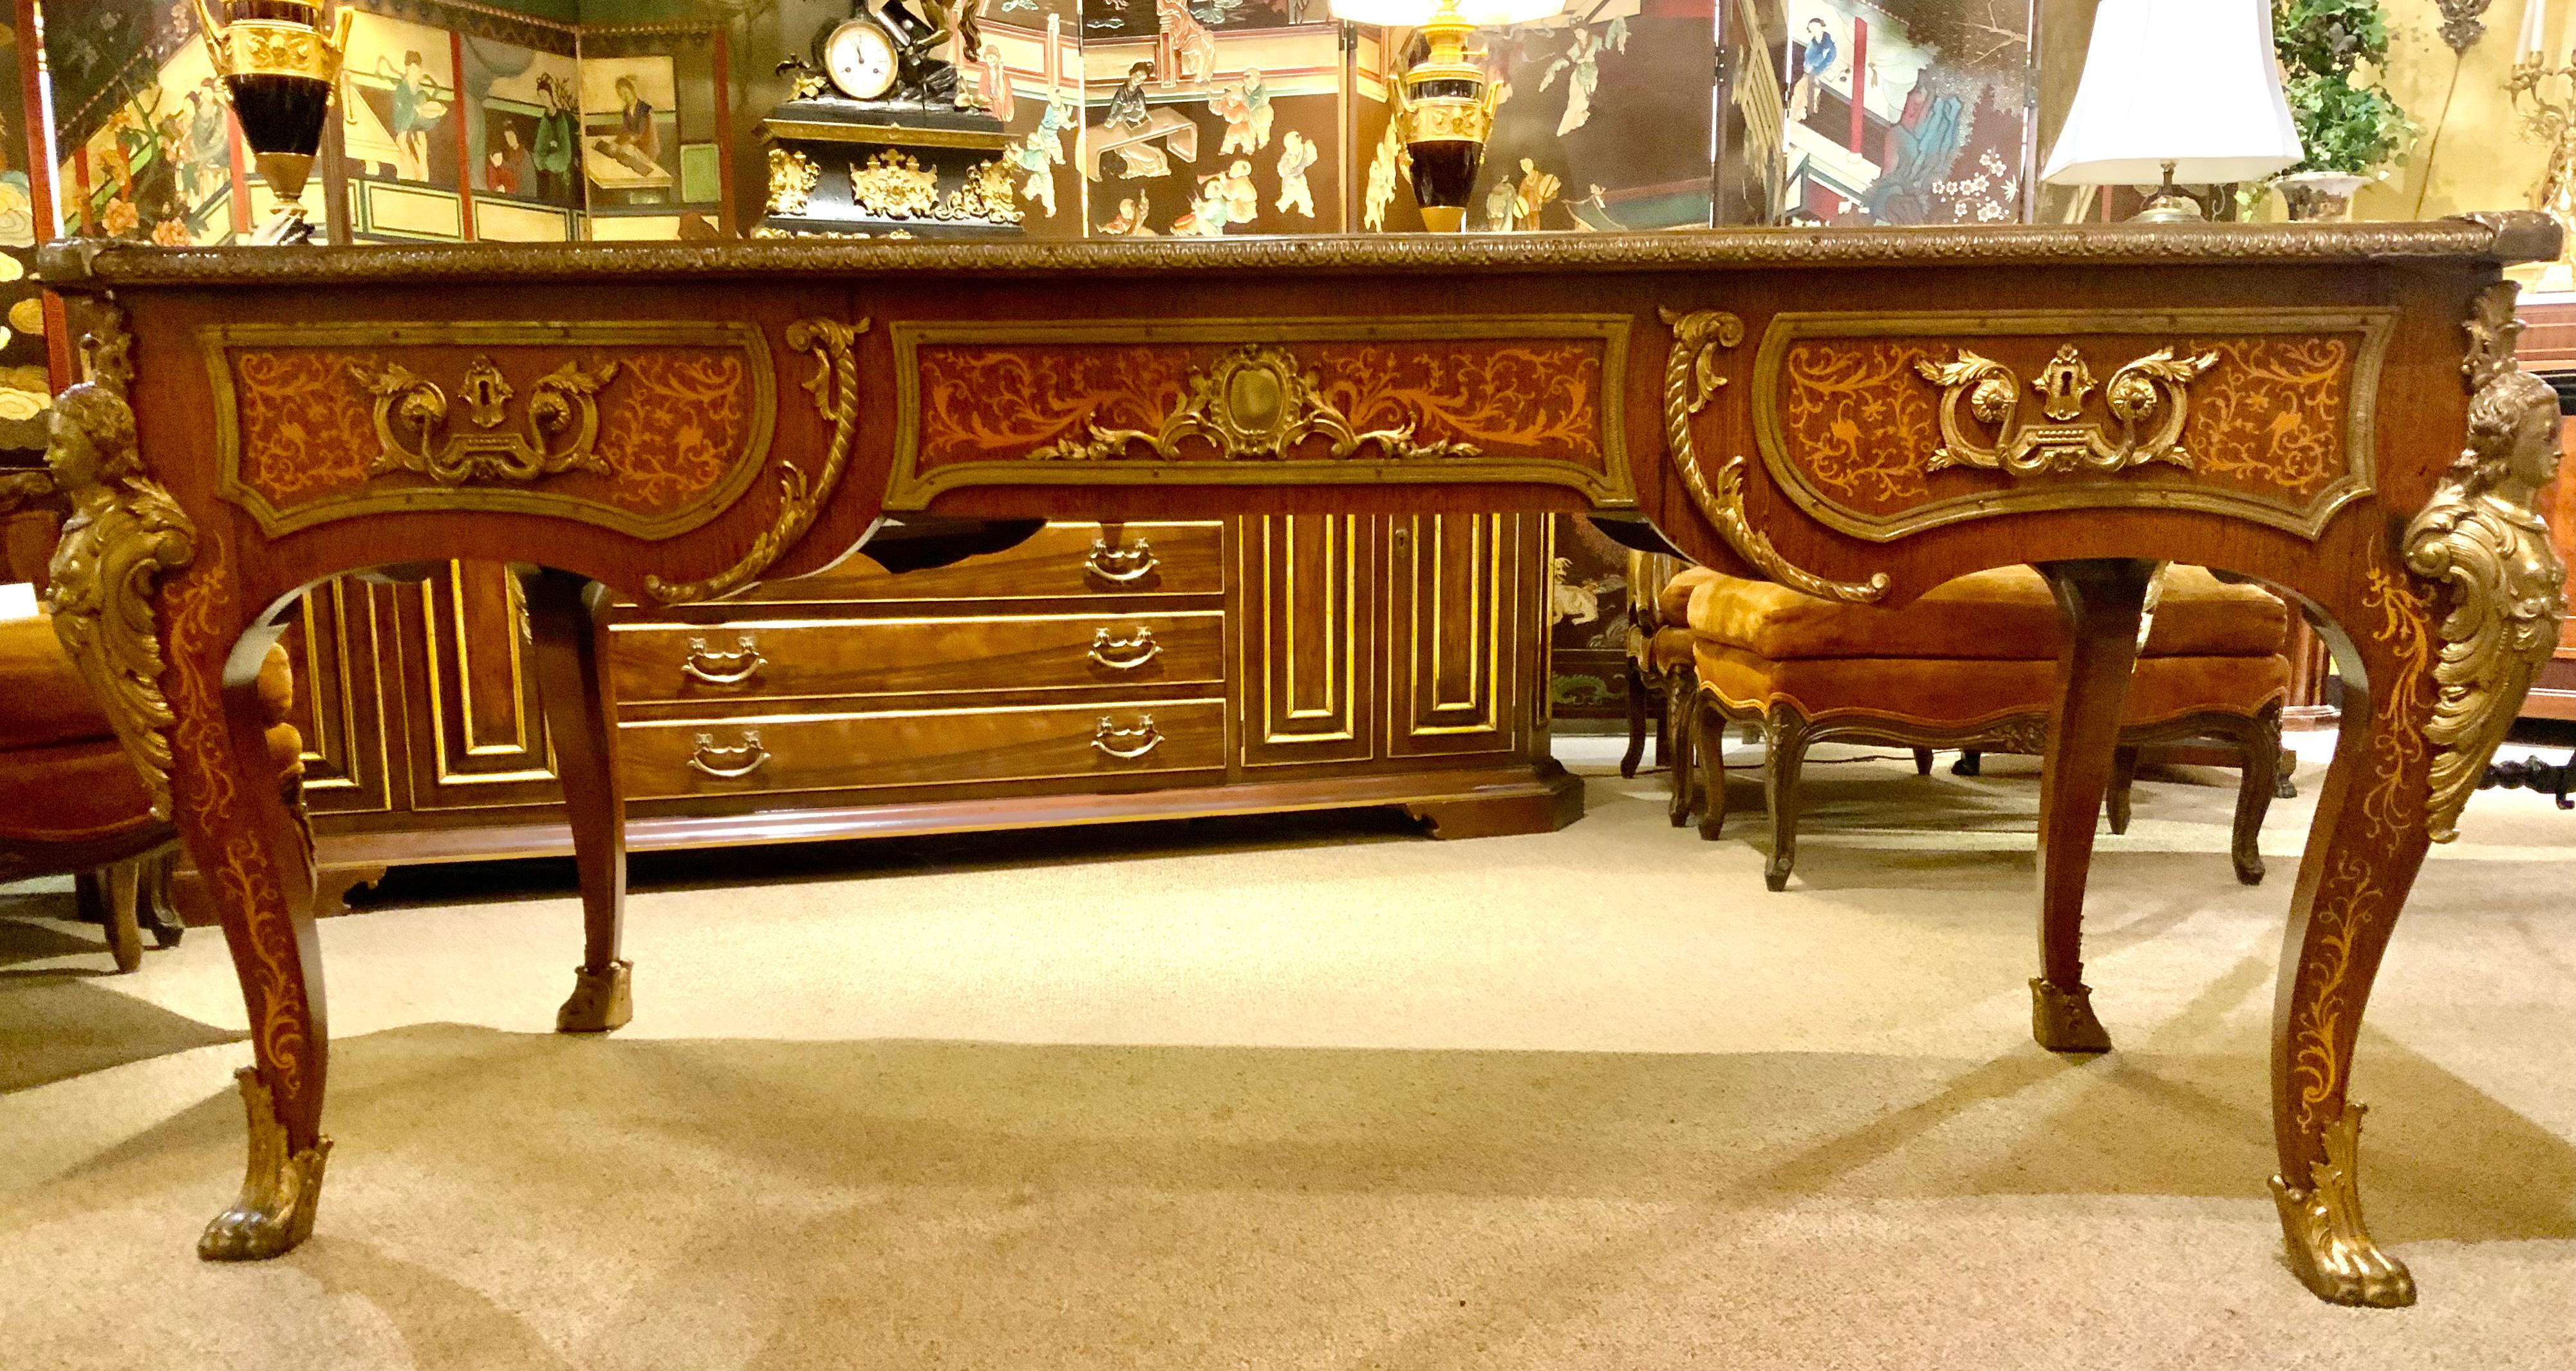 This exquisite desk is very well made with beech wood and oak with
Kingwood marquetry decorative motifs. Gilt bronze mounts decorate 
The edge and gilt masks embellish each corner. The rectangular top
Is black with gilt embossed edge. It has